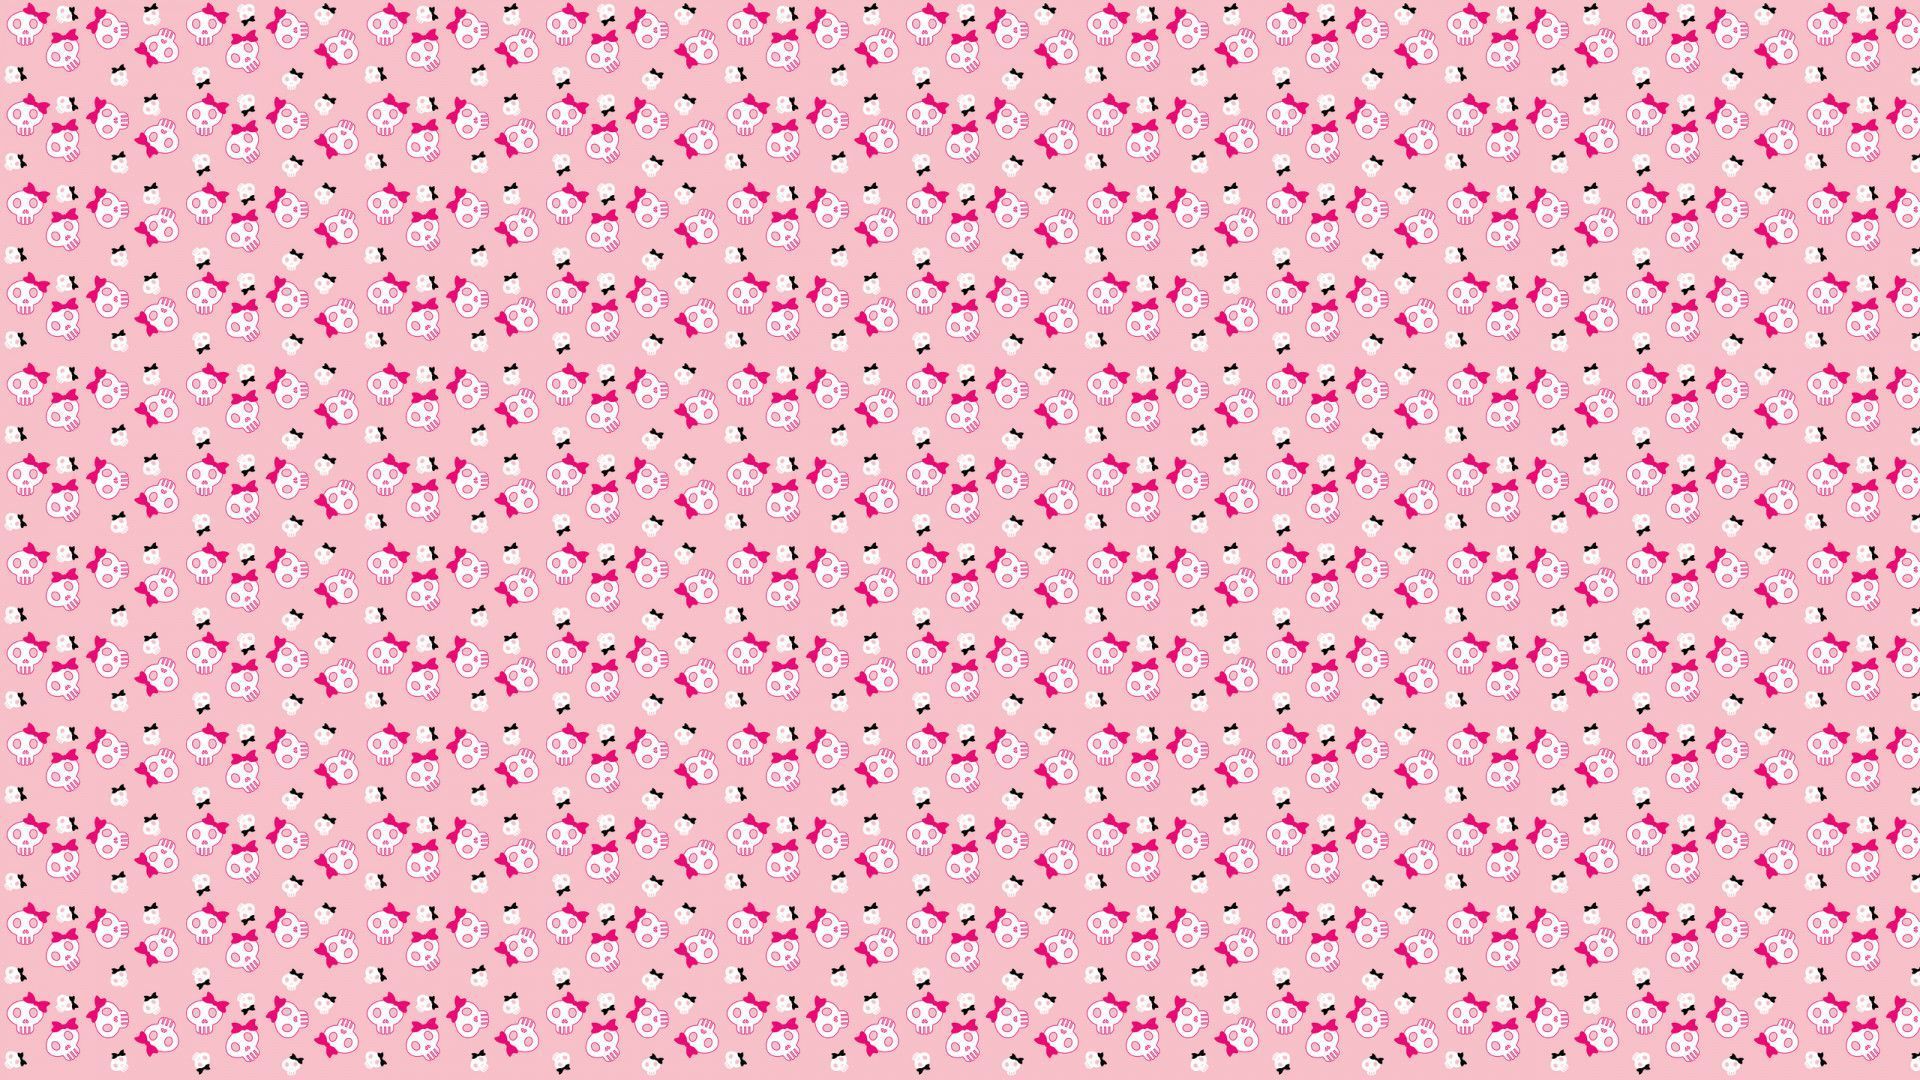 A pink pattern with small hearts - YouTube